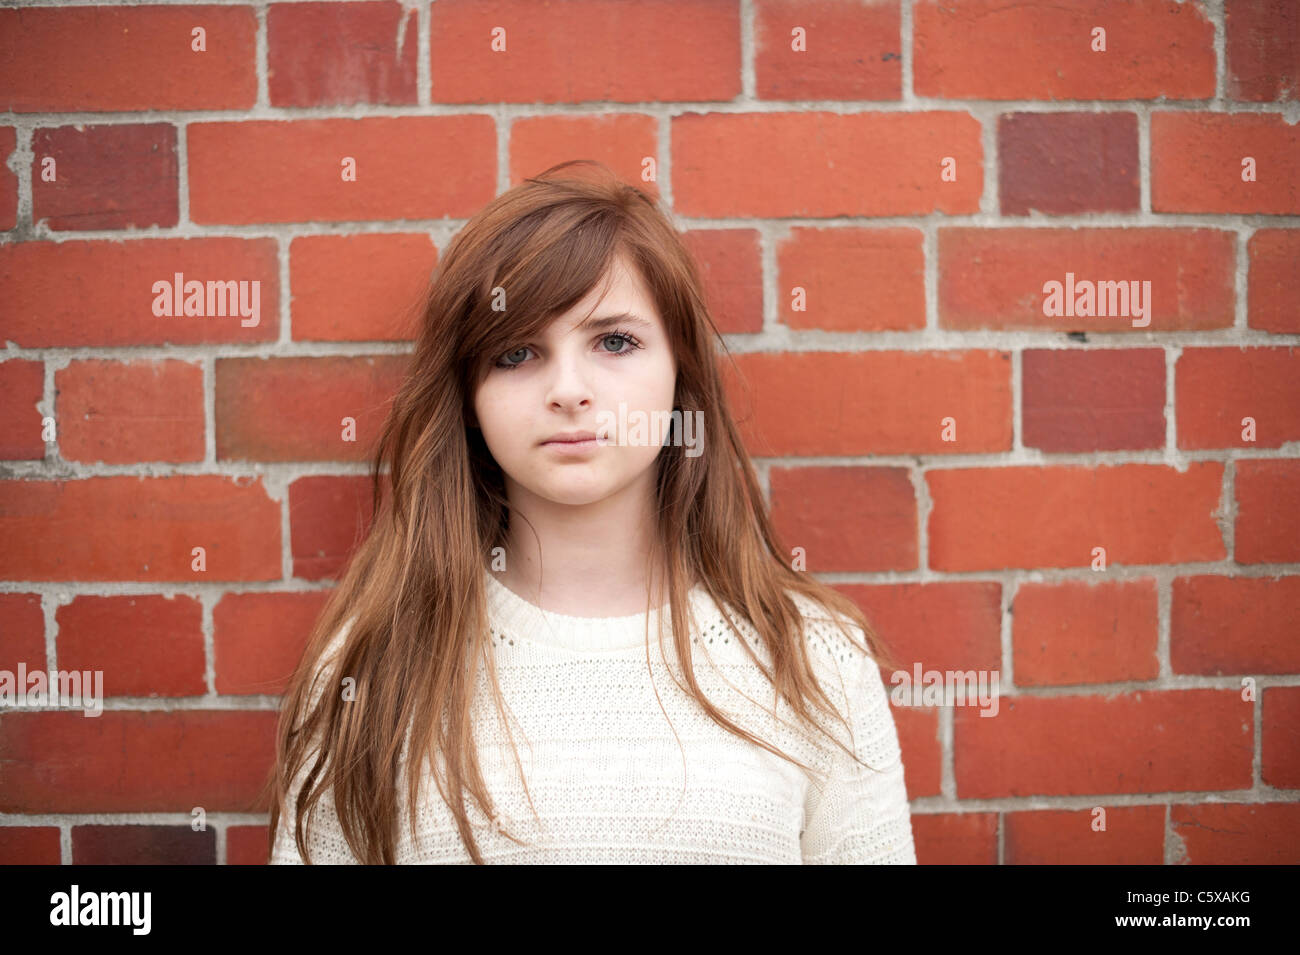 a twelve thirteen 12 13 year old teenage girl standing against a red brick wall Stock Photo